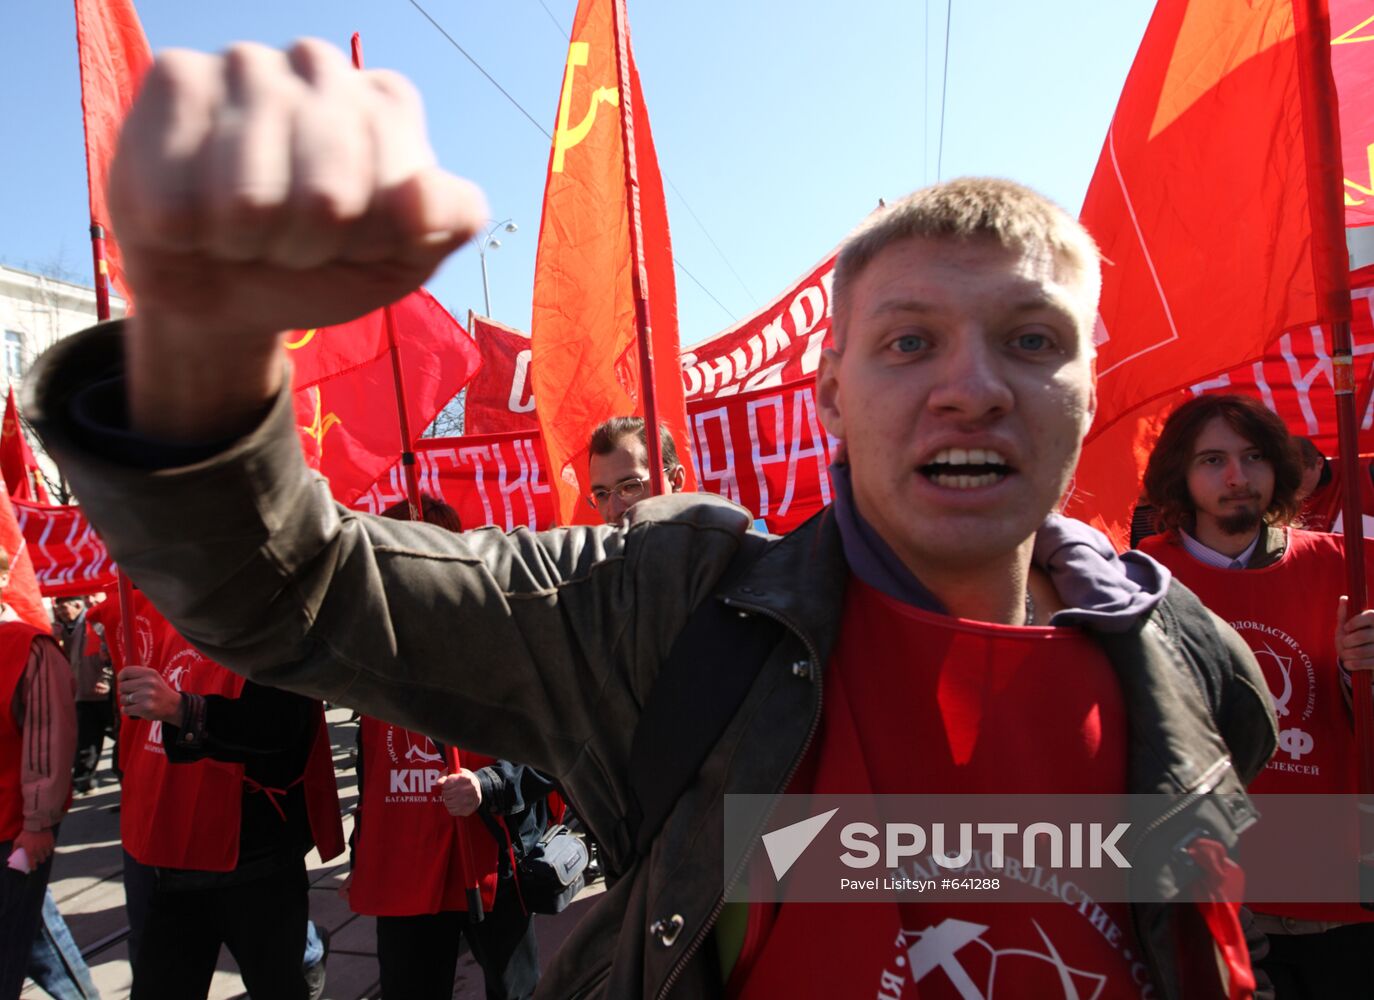 May Day rally in Yekaterinburg